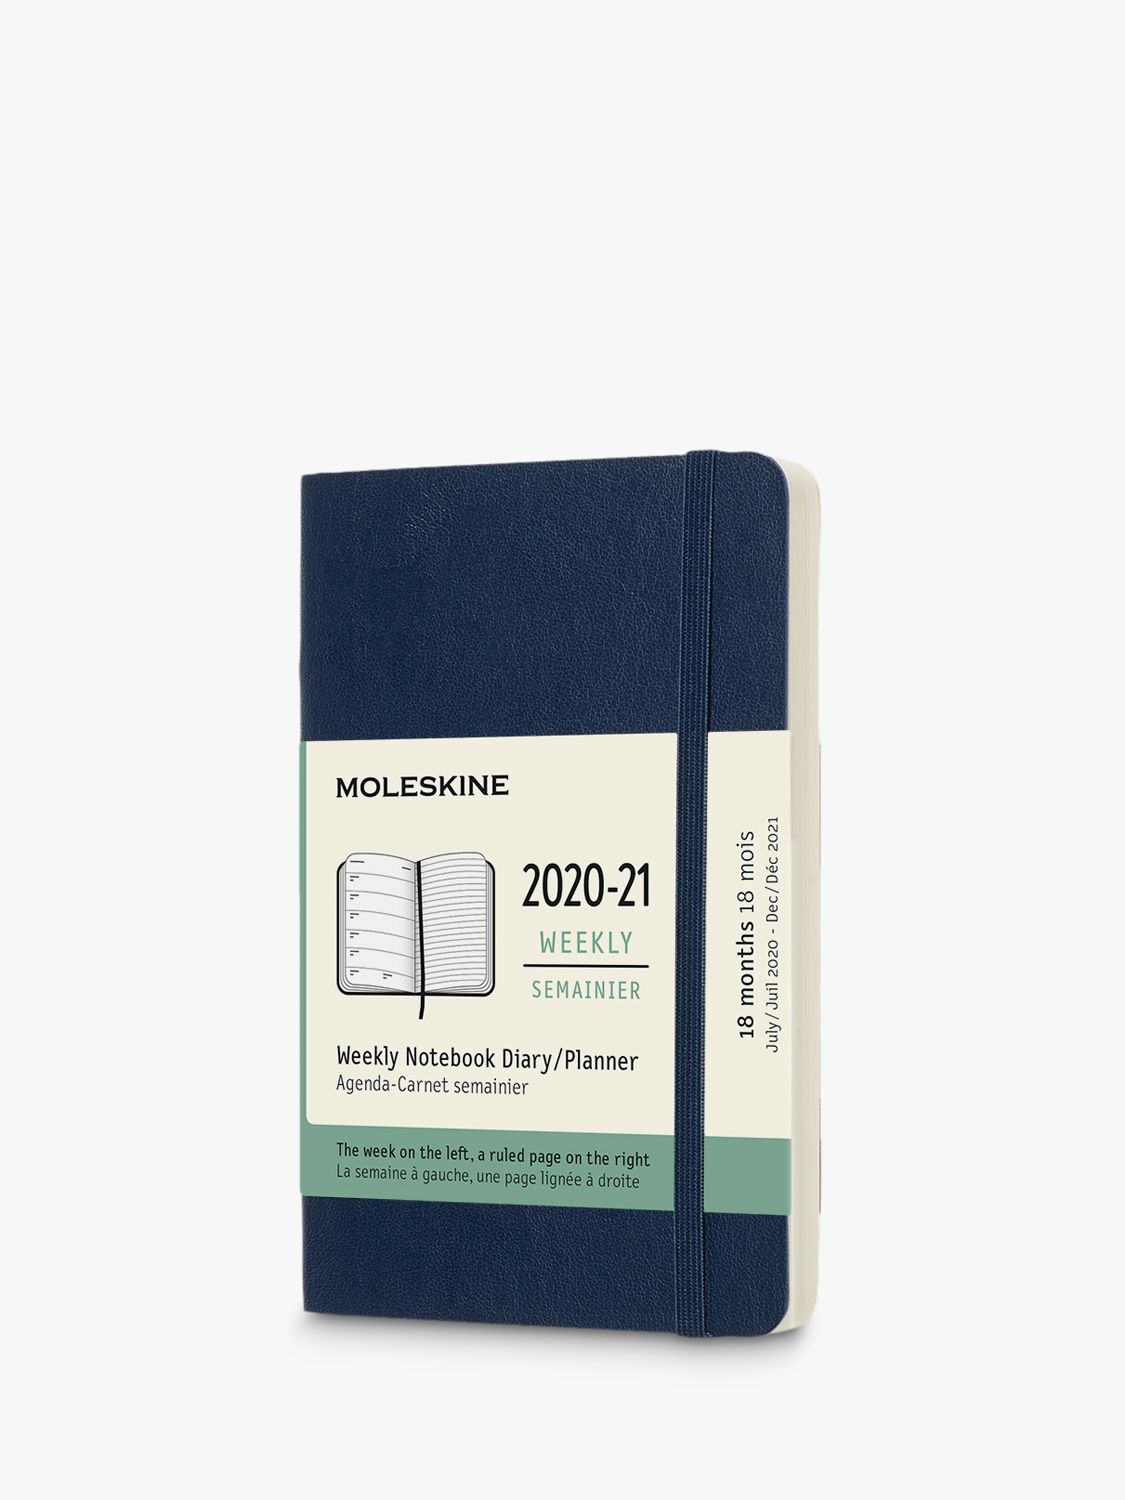 Moleskine Pocket Softcover Weekly Mid Year Academic Notebook Diary 2020